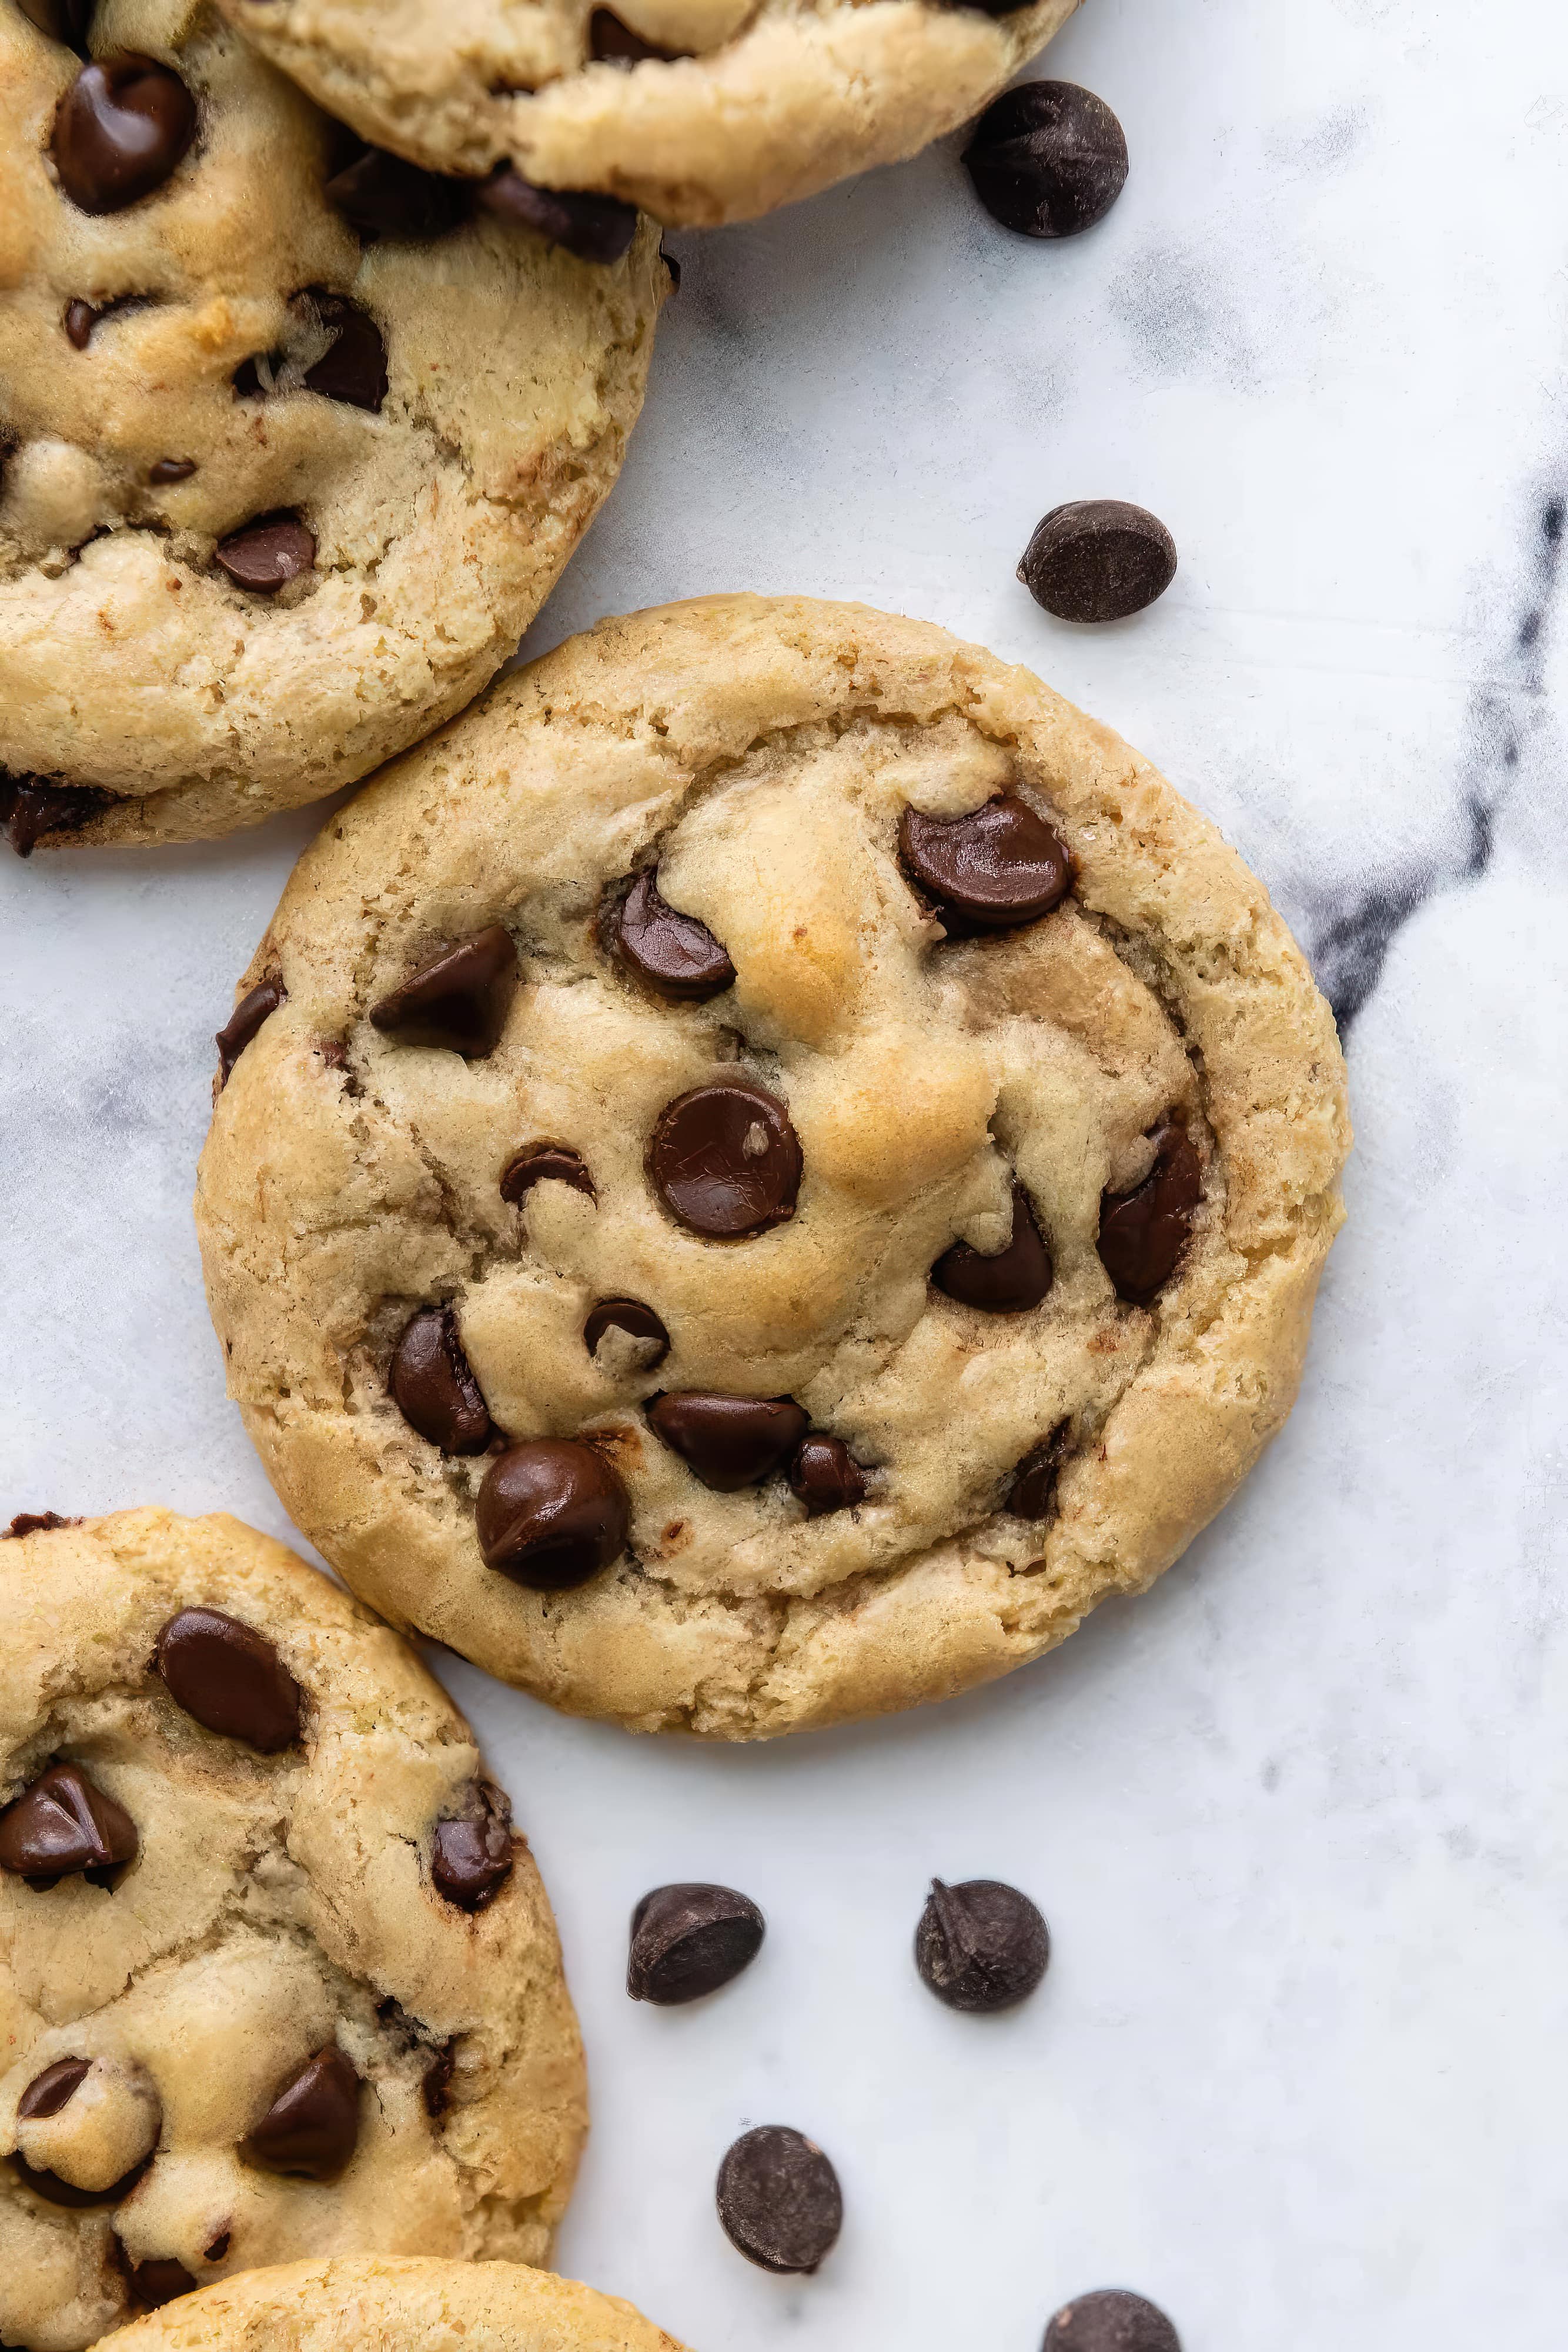 Image of gluten-free chocolate chip cookies